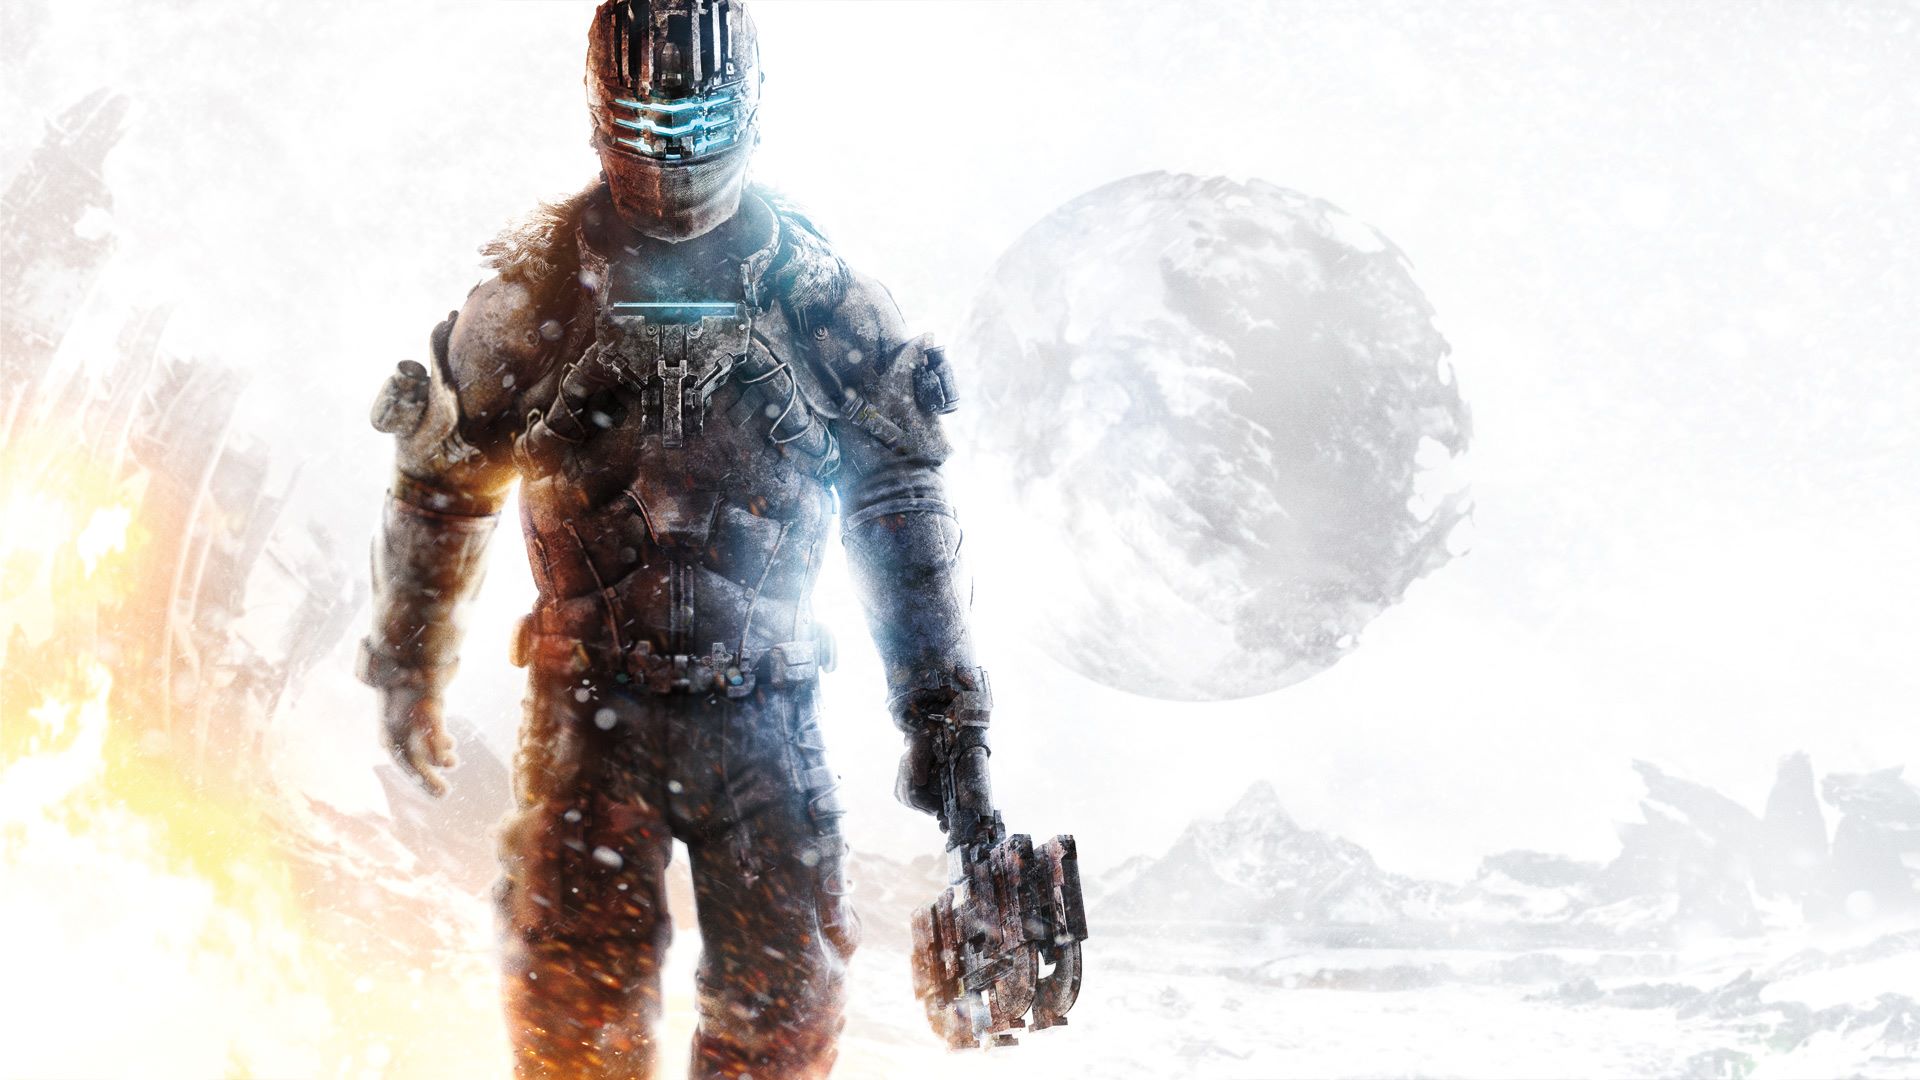 dead space 3 ps4 movie